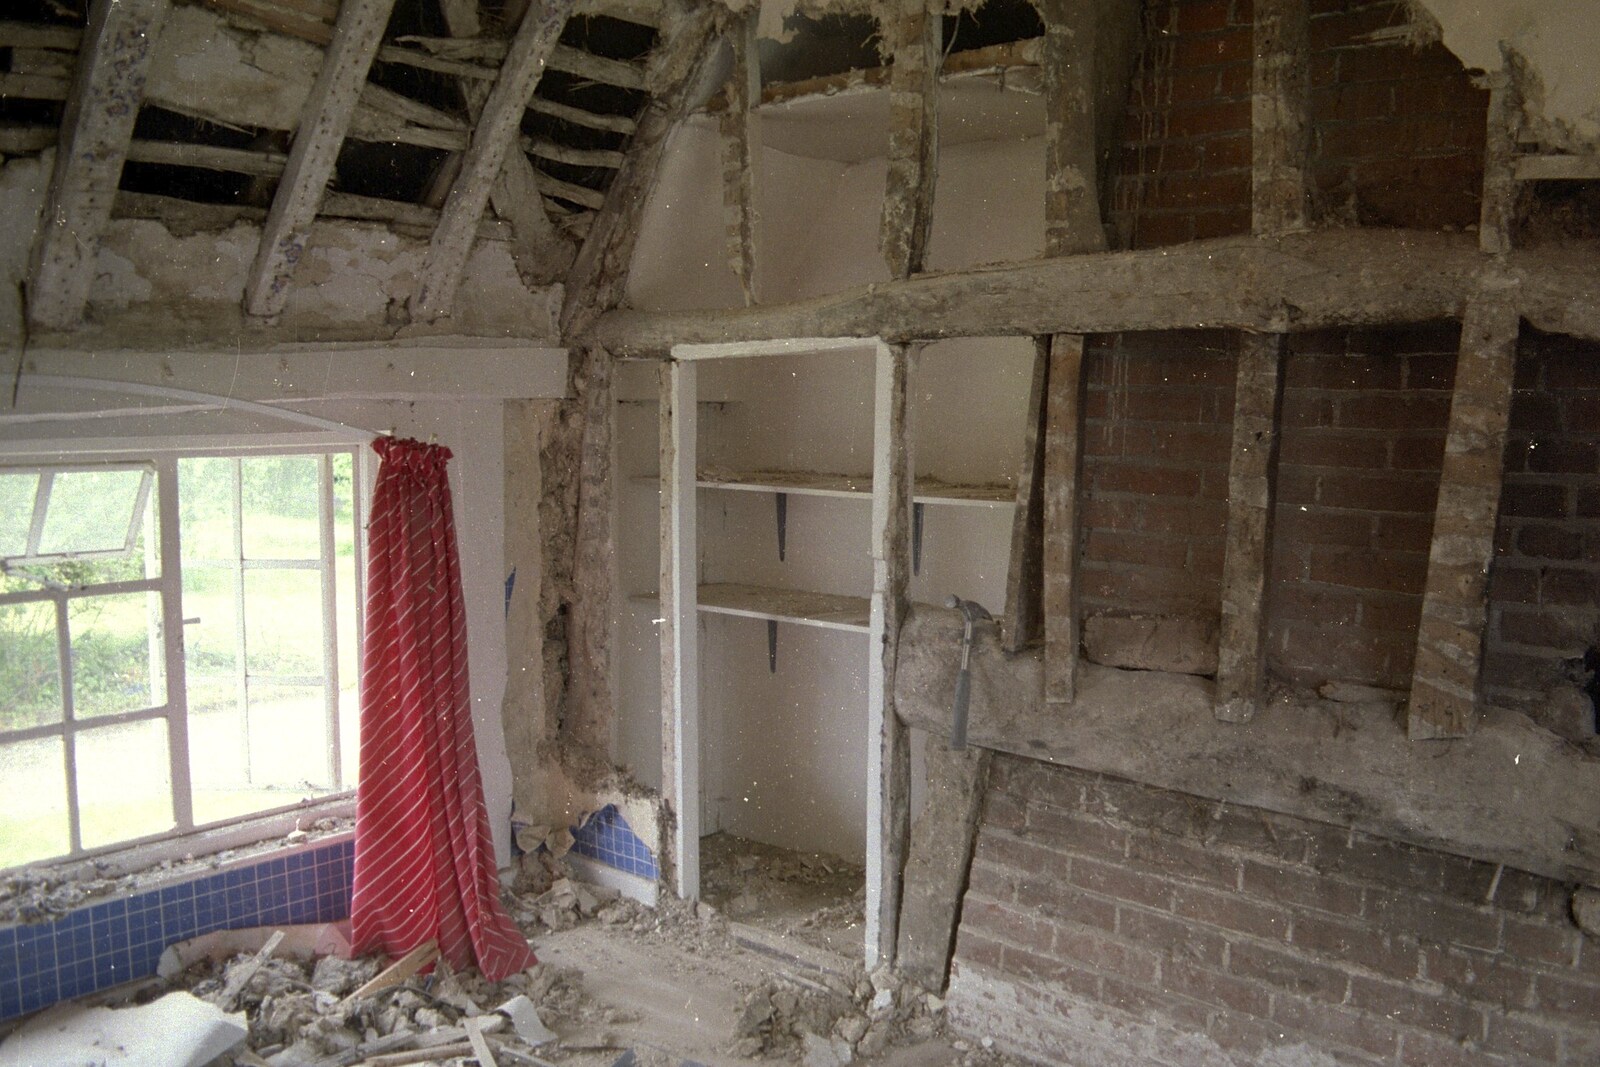 The remains of some 80s wallpaper and curtains from House Renovation Randomness and a Spot of Lightning, Brome, Suffolk - 19th June 1994